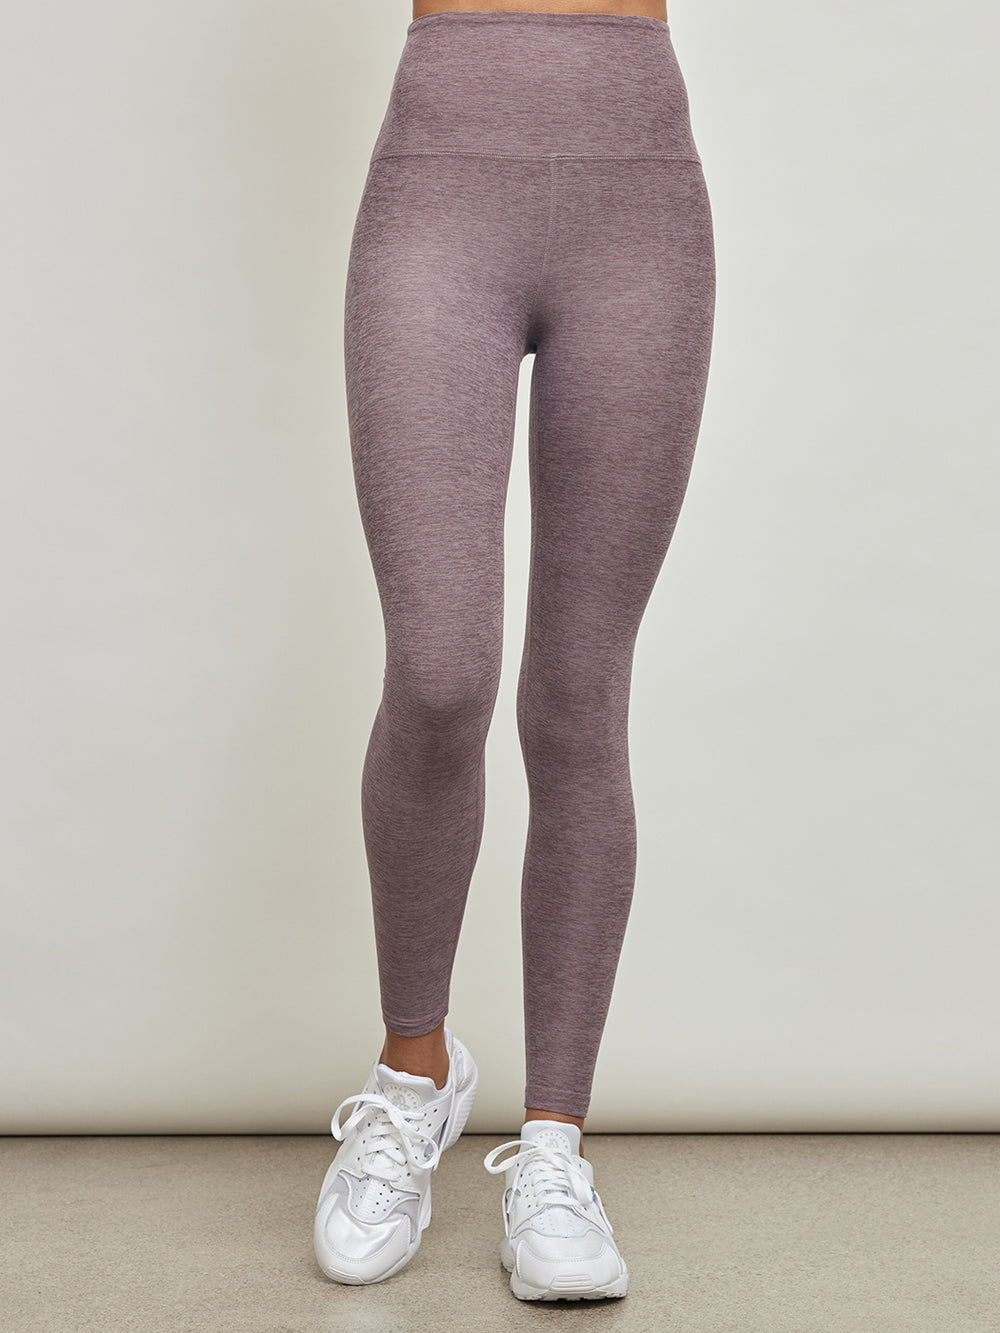 Spacedye Caught In the Midi High Waisted Legging - Silverberry